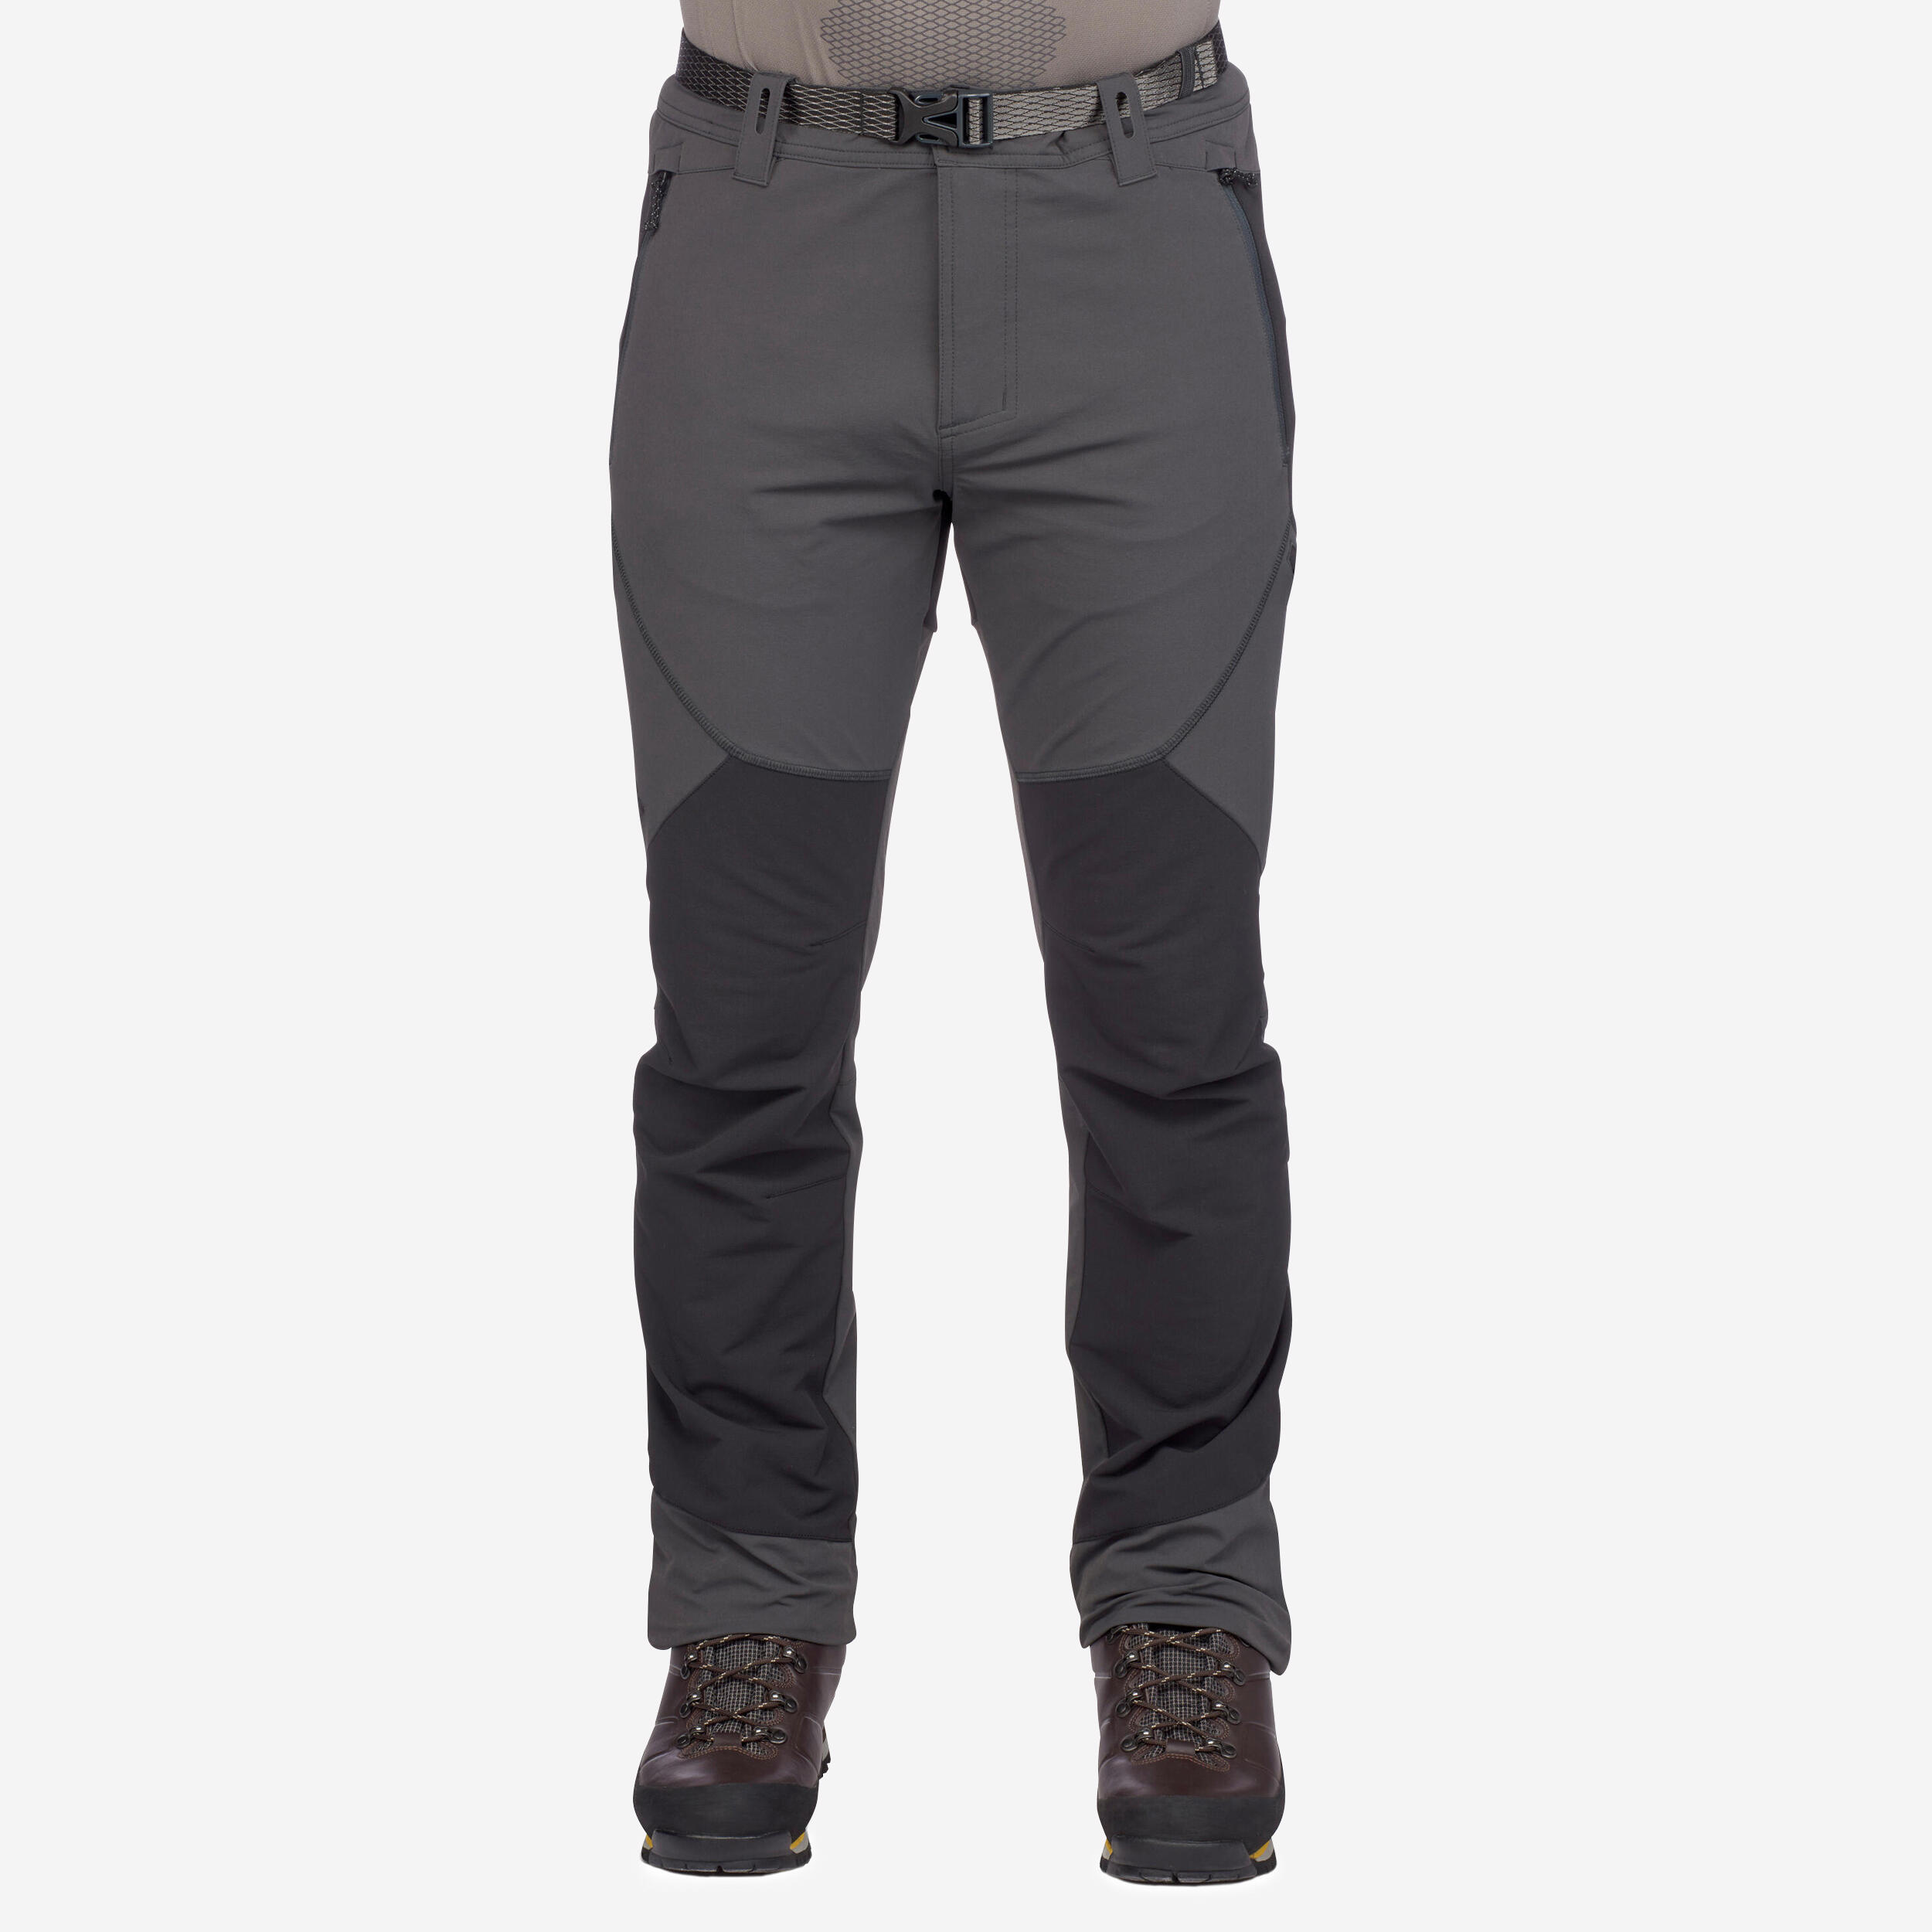 Let's Get to Know Each Other! What Are Your Habits? : Let's design the  ideal trekking pants among mountain enthusiasts! | Decathlon Co-creation